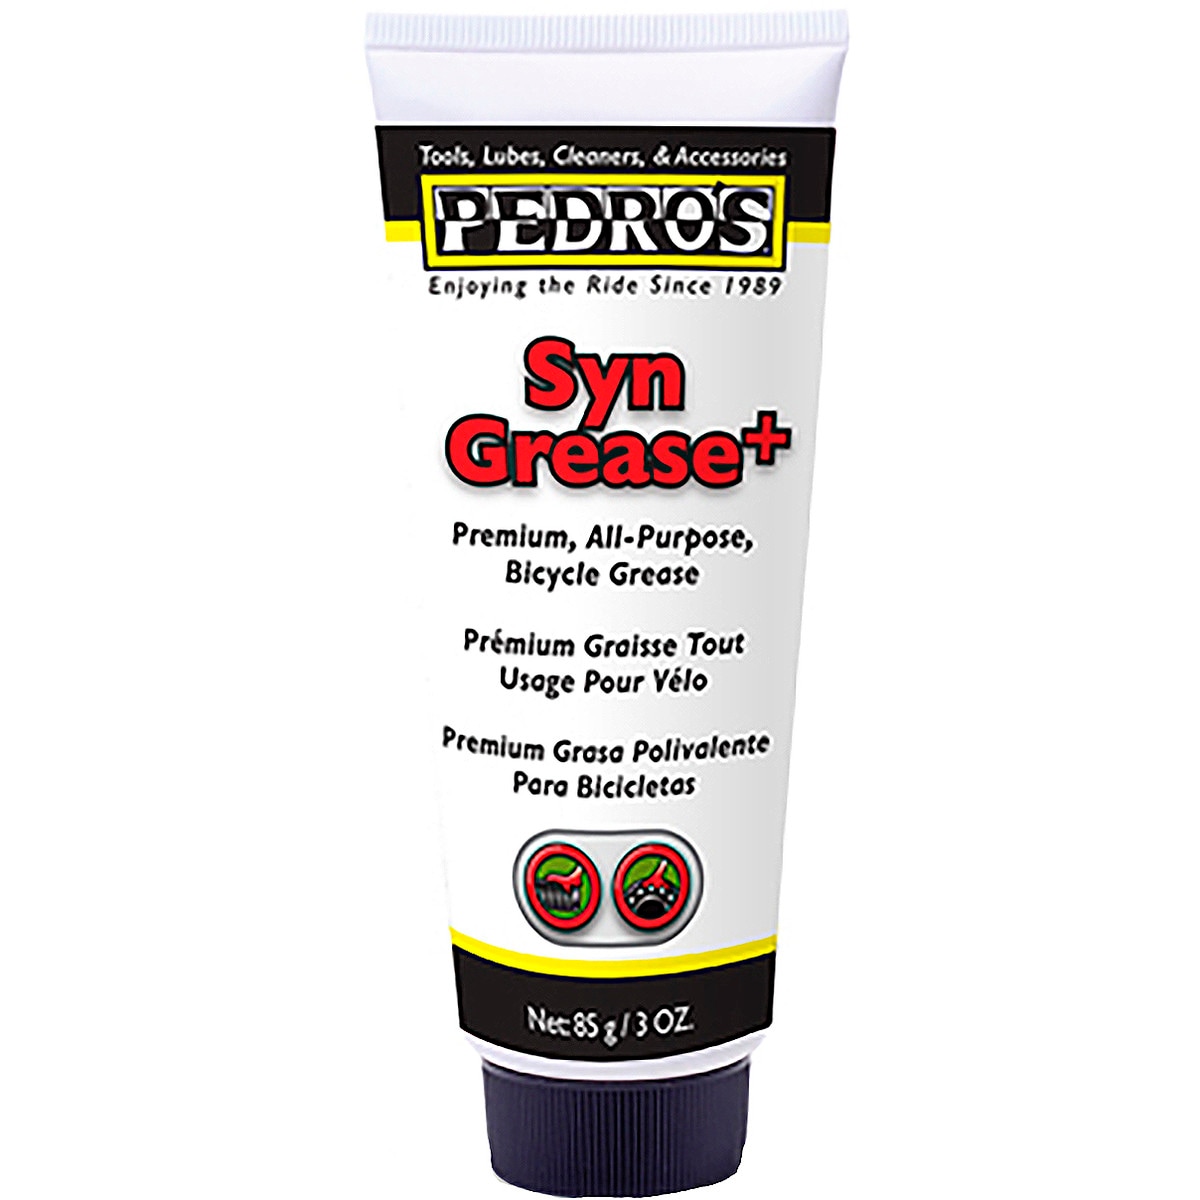 Pedro's Syn Grease Plus